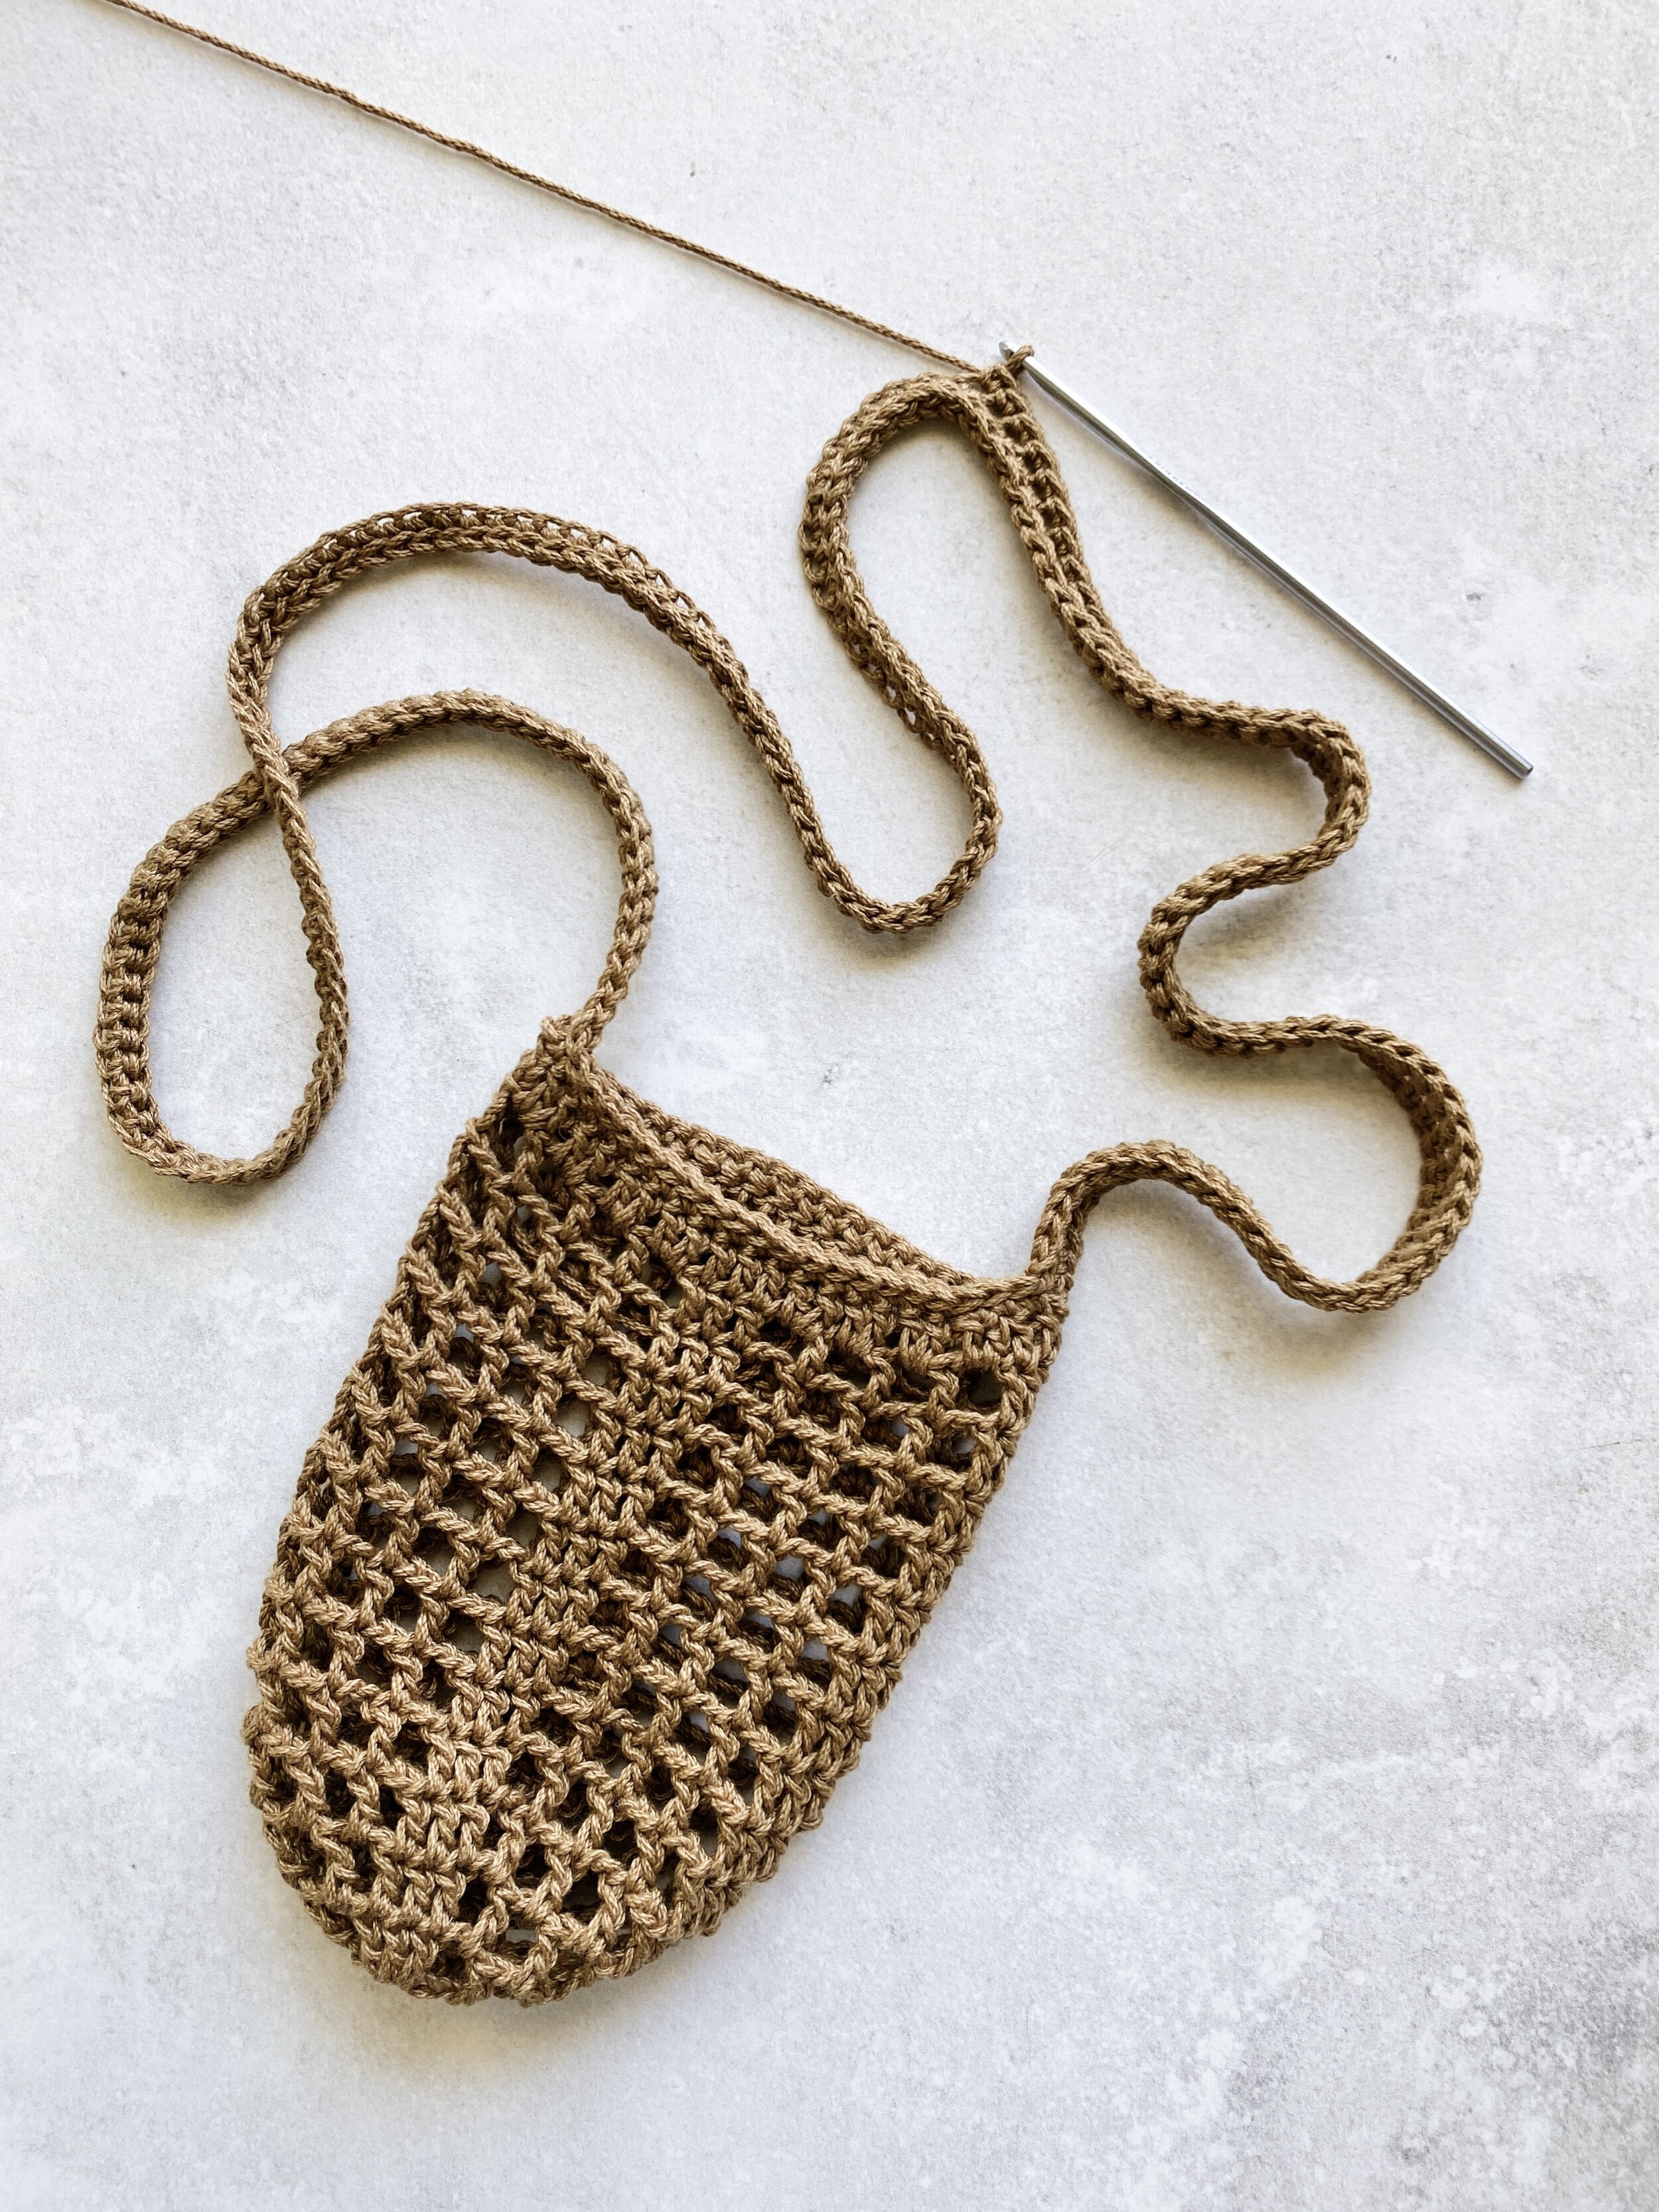 Dune Bag Crochet Pattern by Two of Wands — Two of Wands